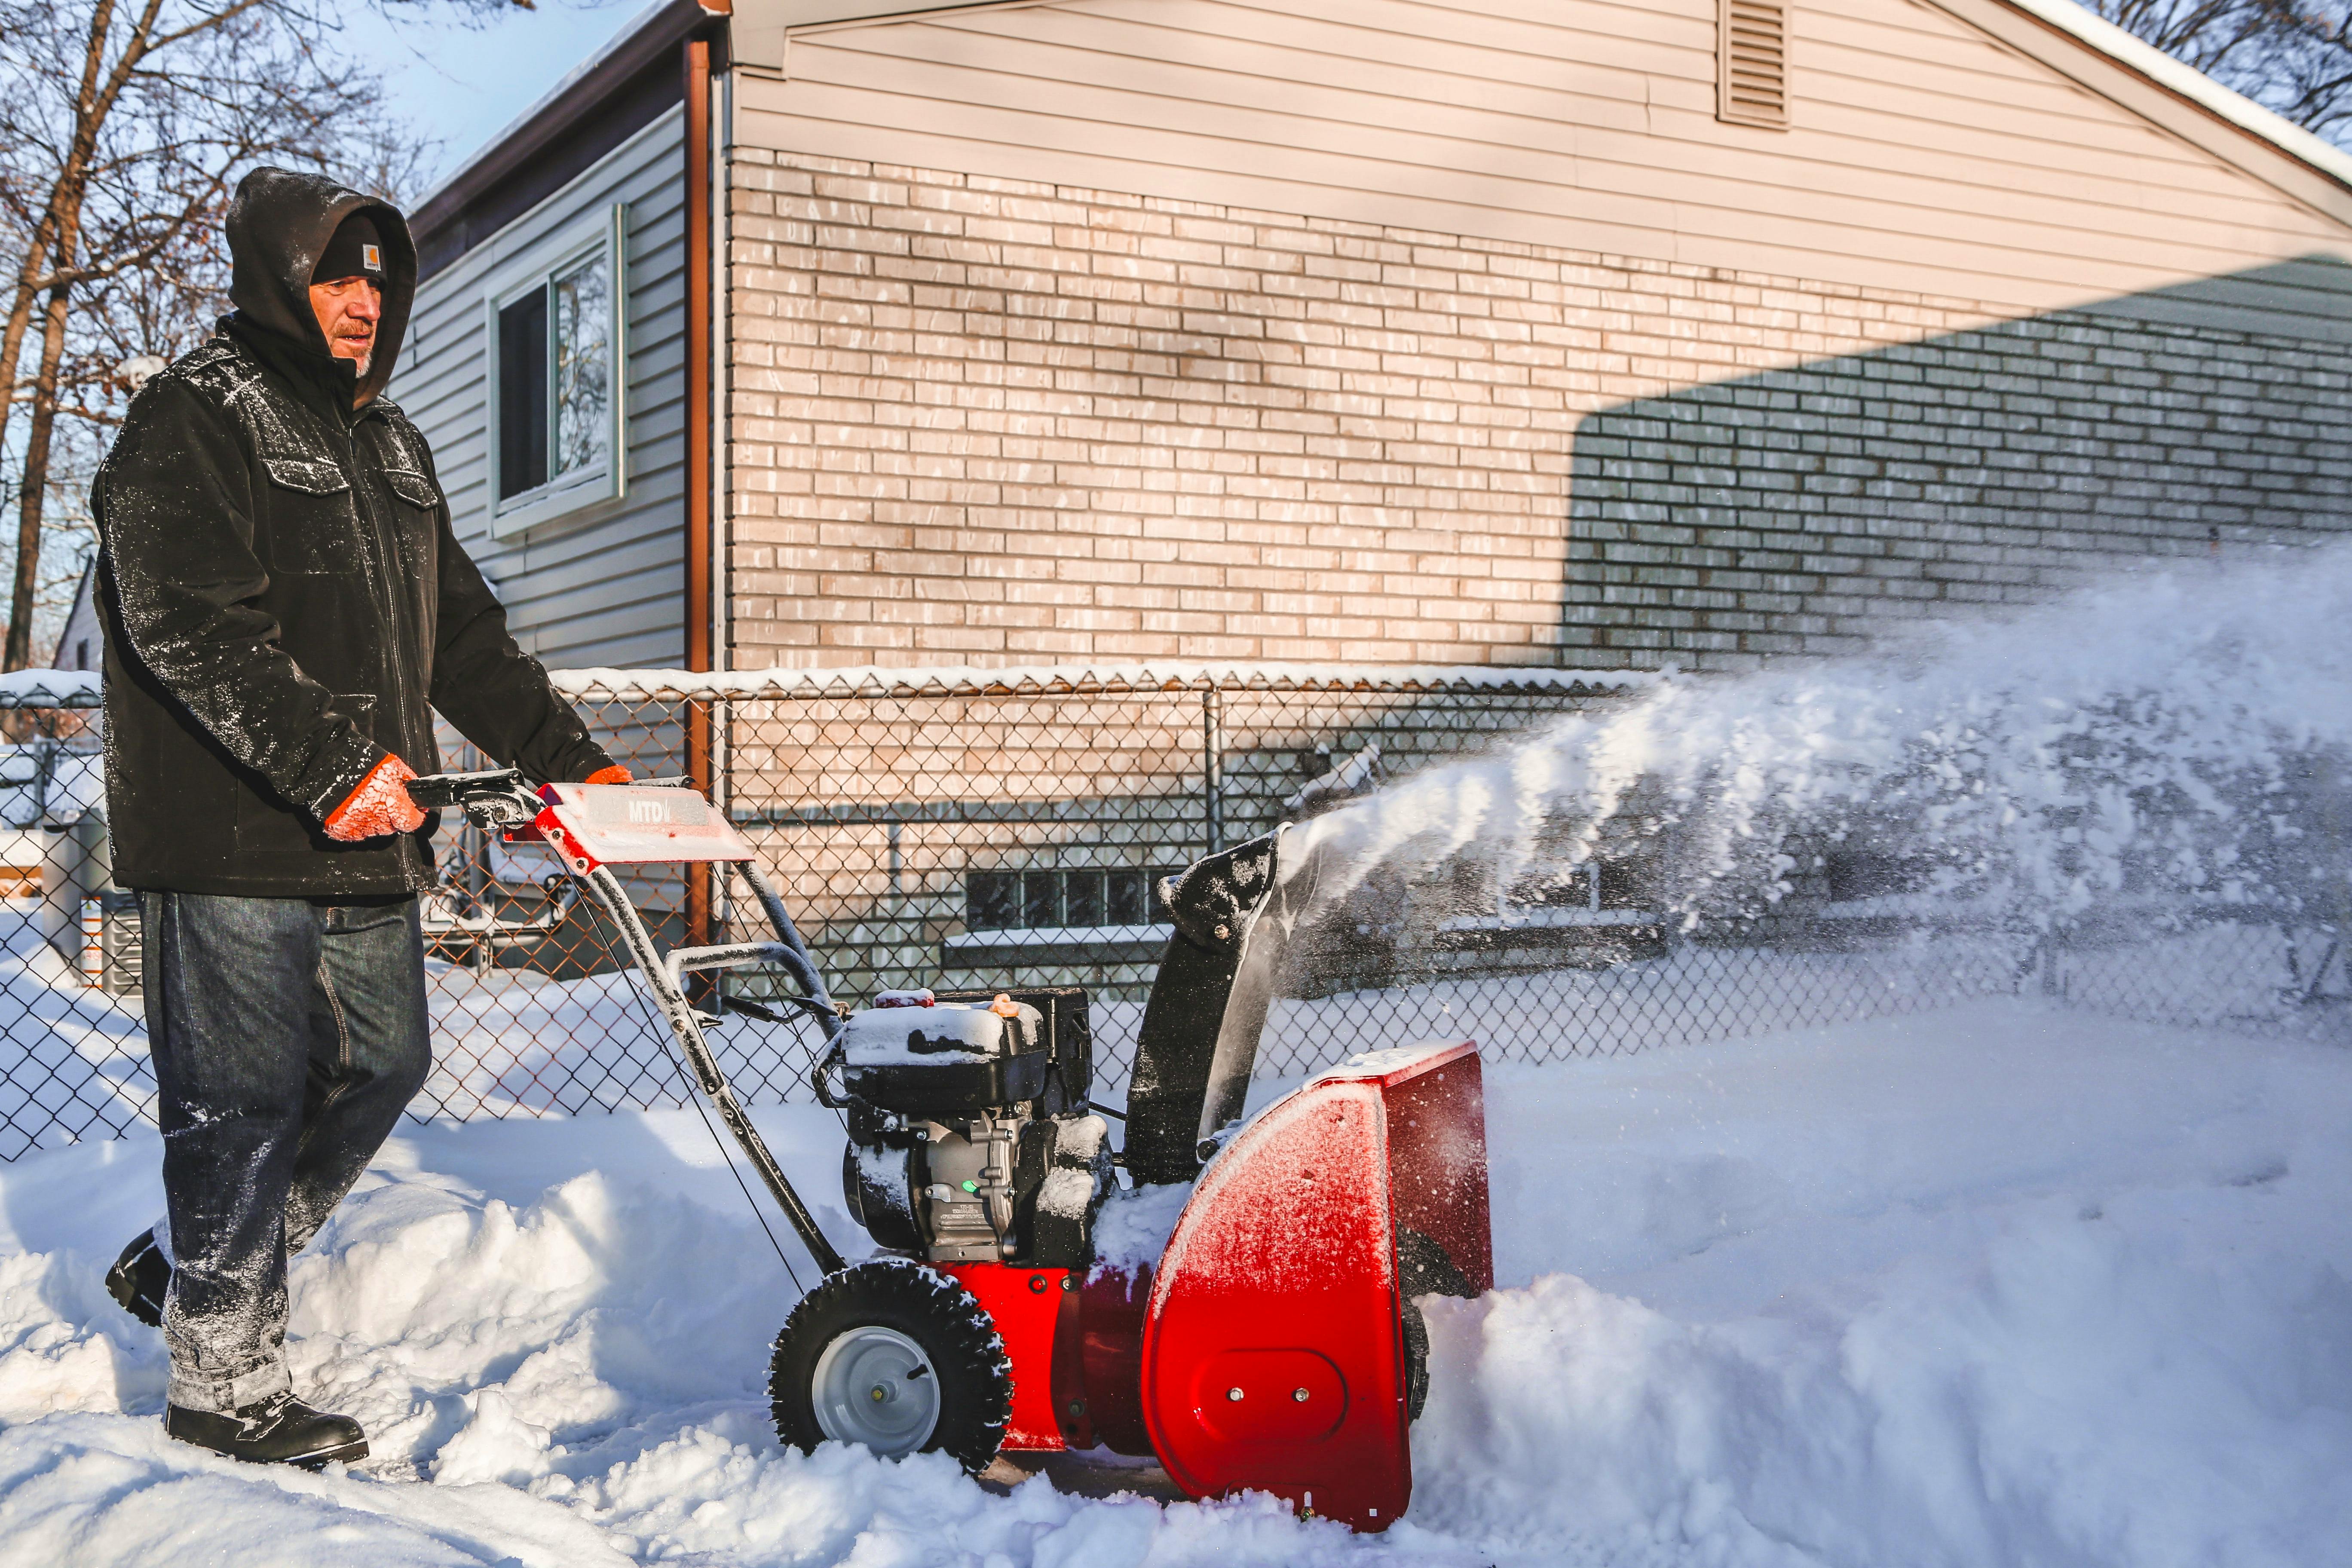 What to keep your snowblower on?